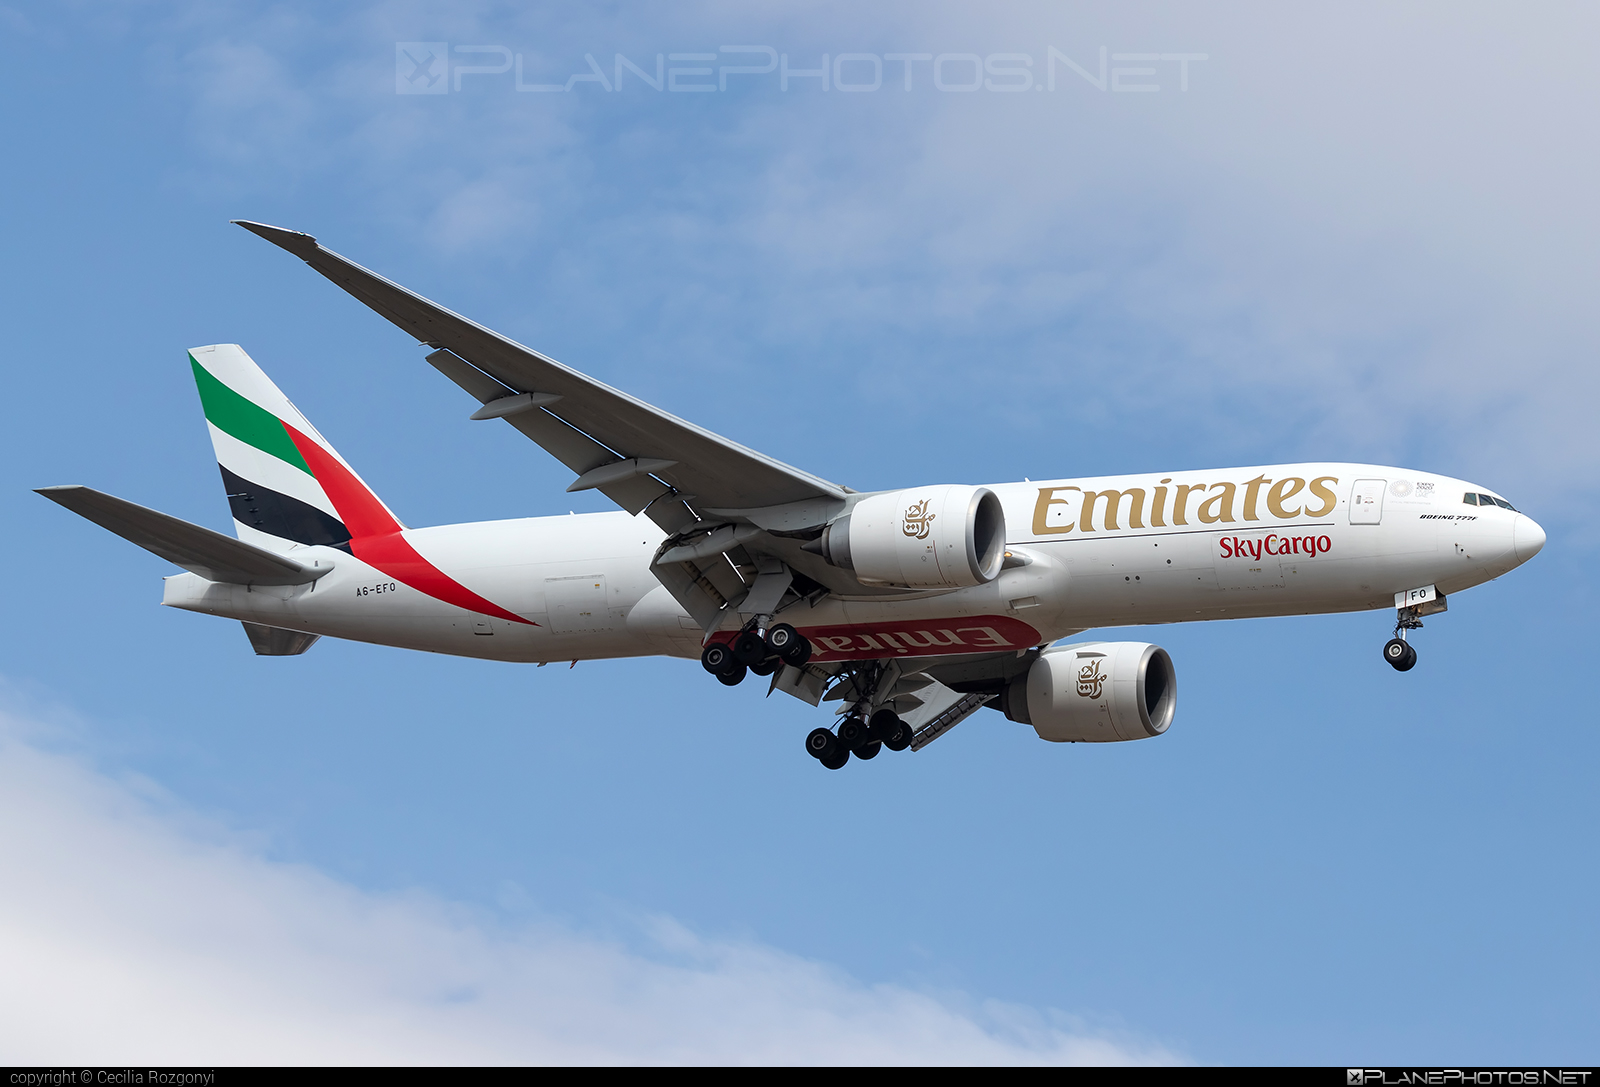 Boeing 777F - A6-EFO operated by Emirates SkyCargo #b777 #b777f #b777freighter #boeing #boeing777 #tripleseven